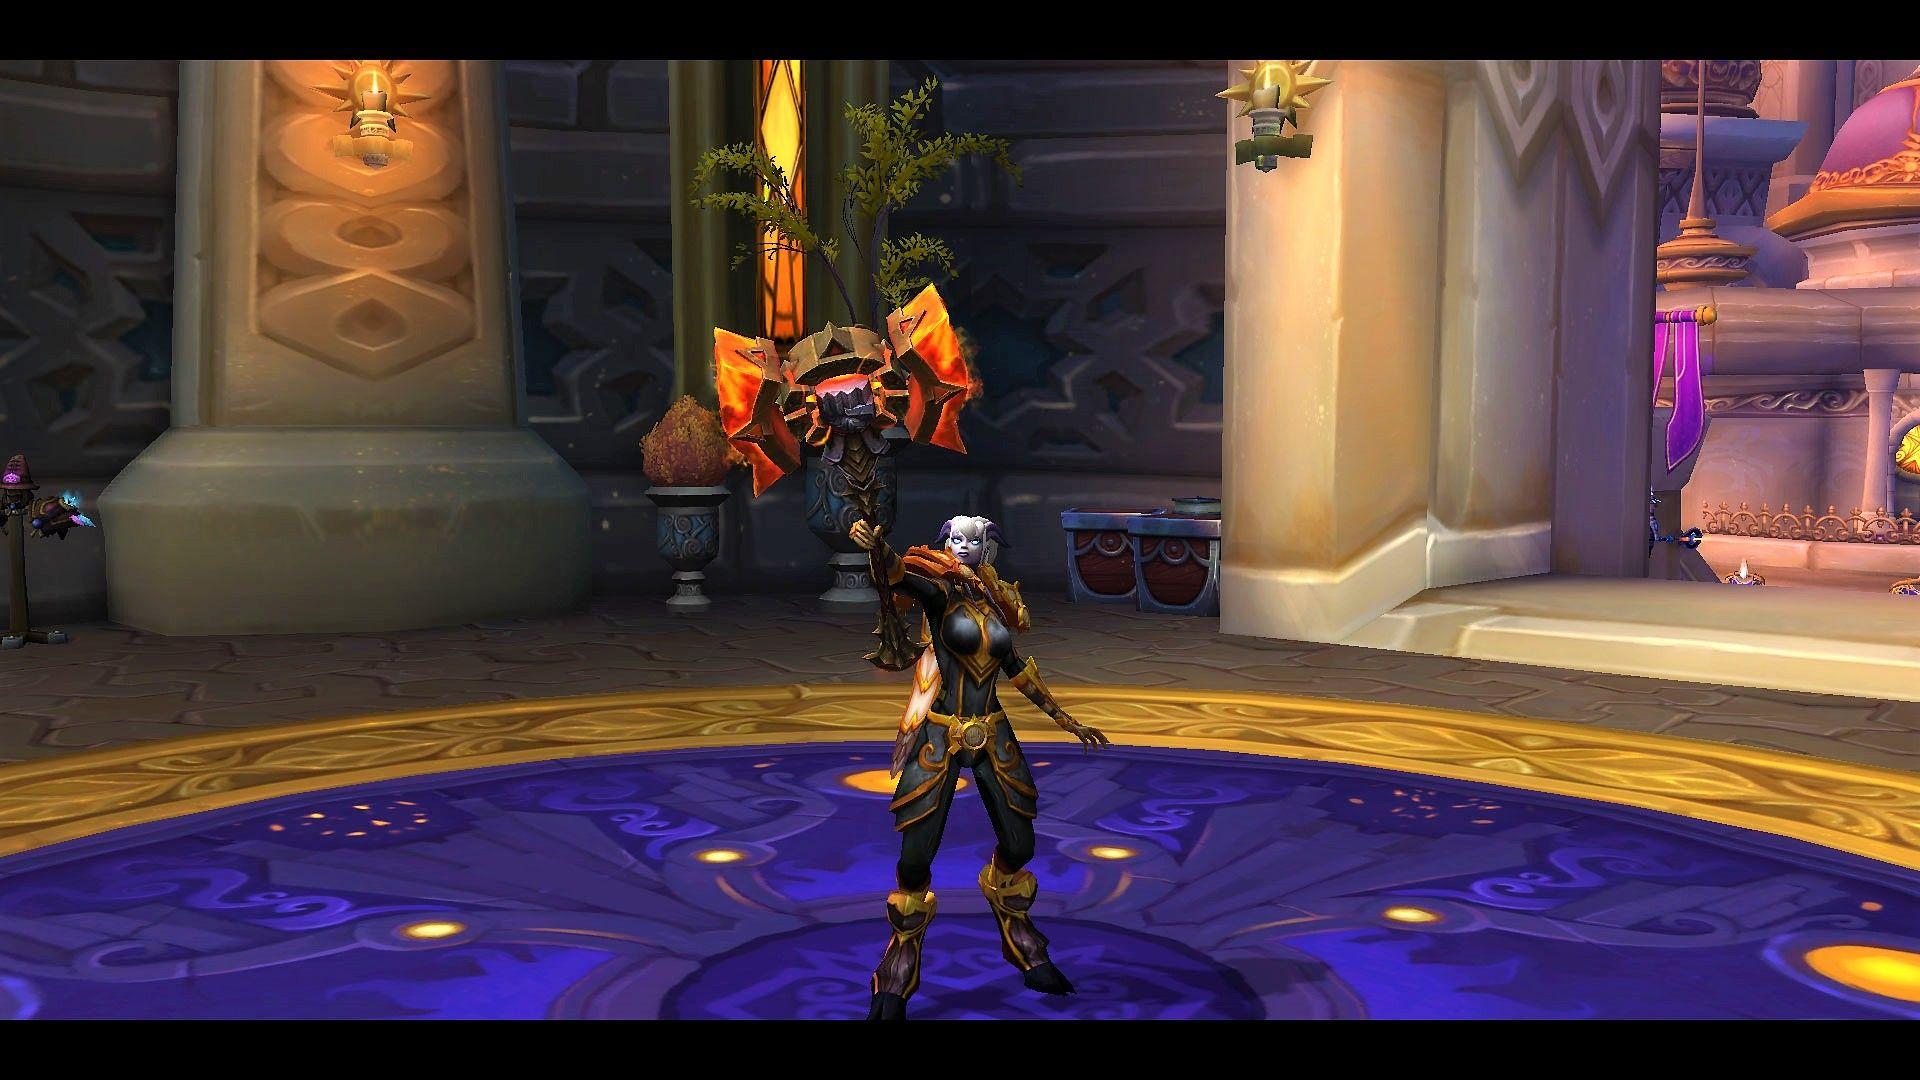 Mage Tower Challenge: Holy Paladin Style. Growing up in Azeroth